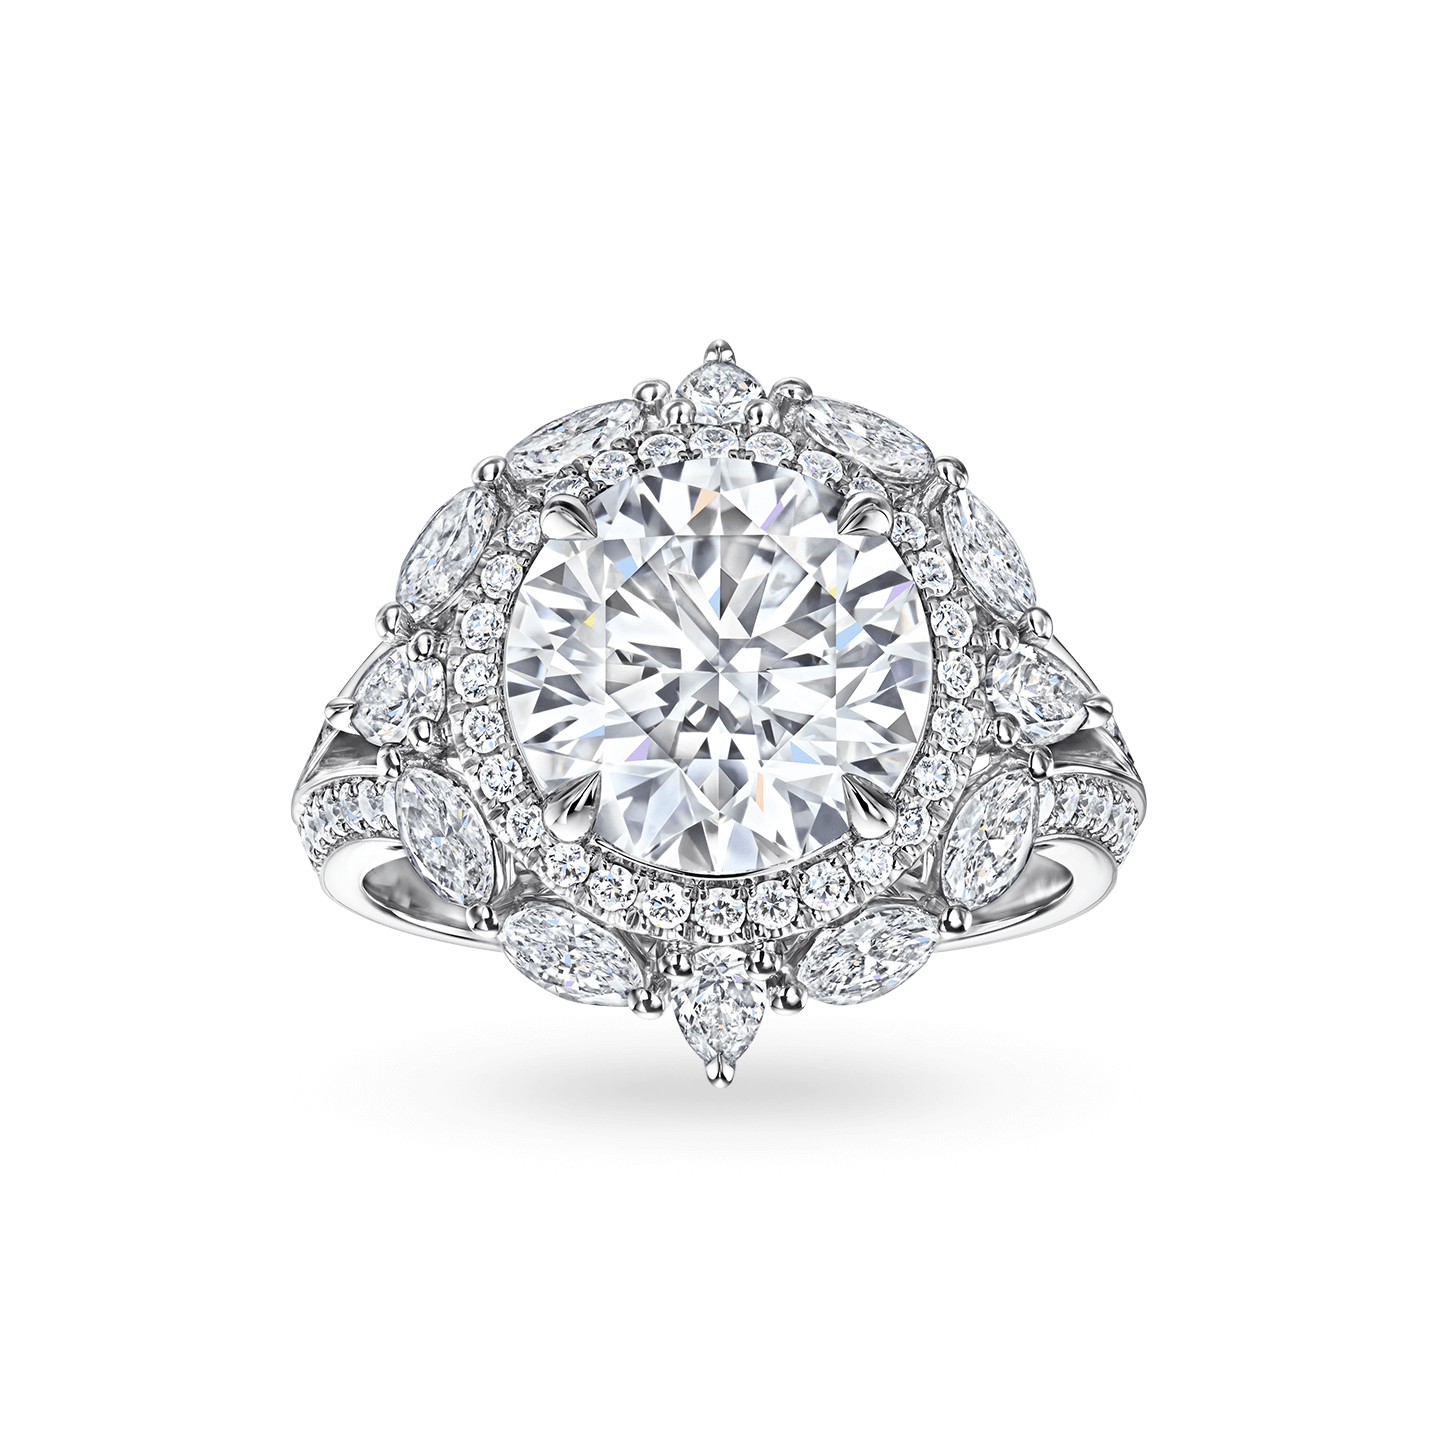 Front view of the Bridal Couture Round Brilliant Diamond Engagement Ring